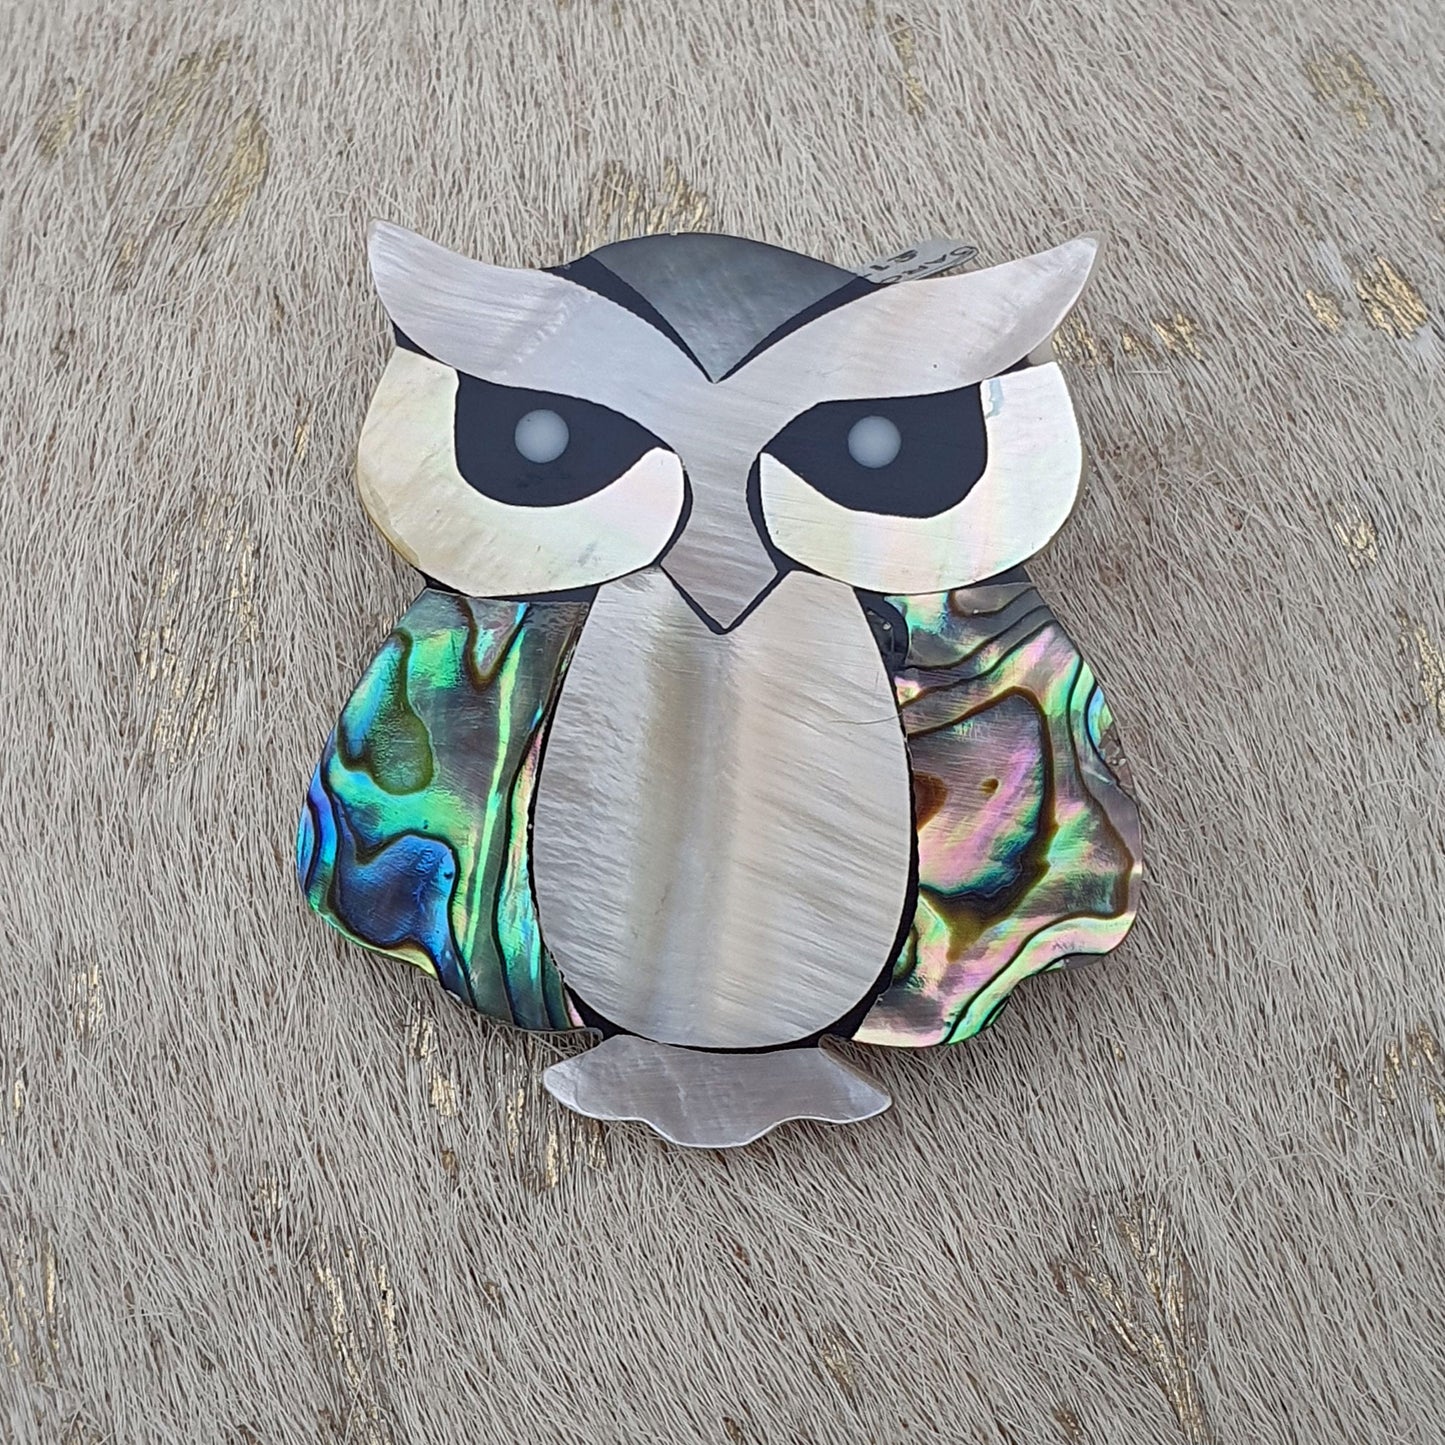 Owl brooch in mother of pearl & abalone shell